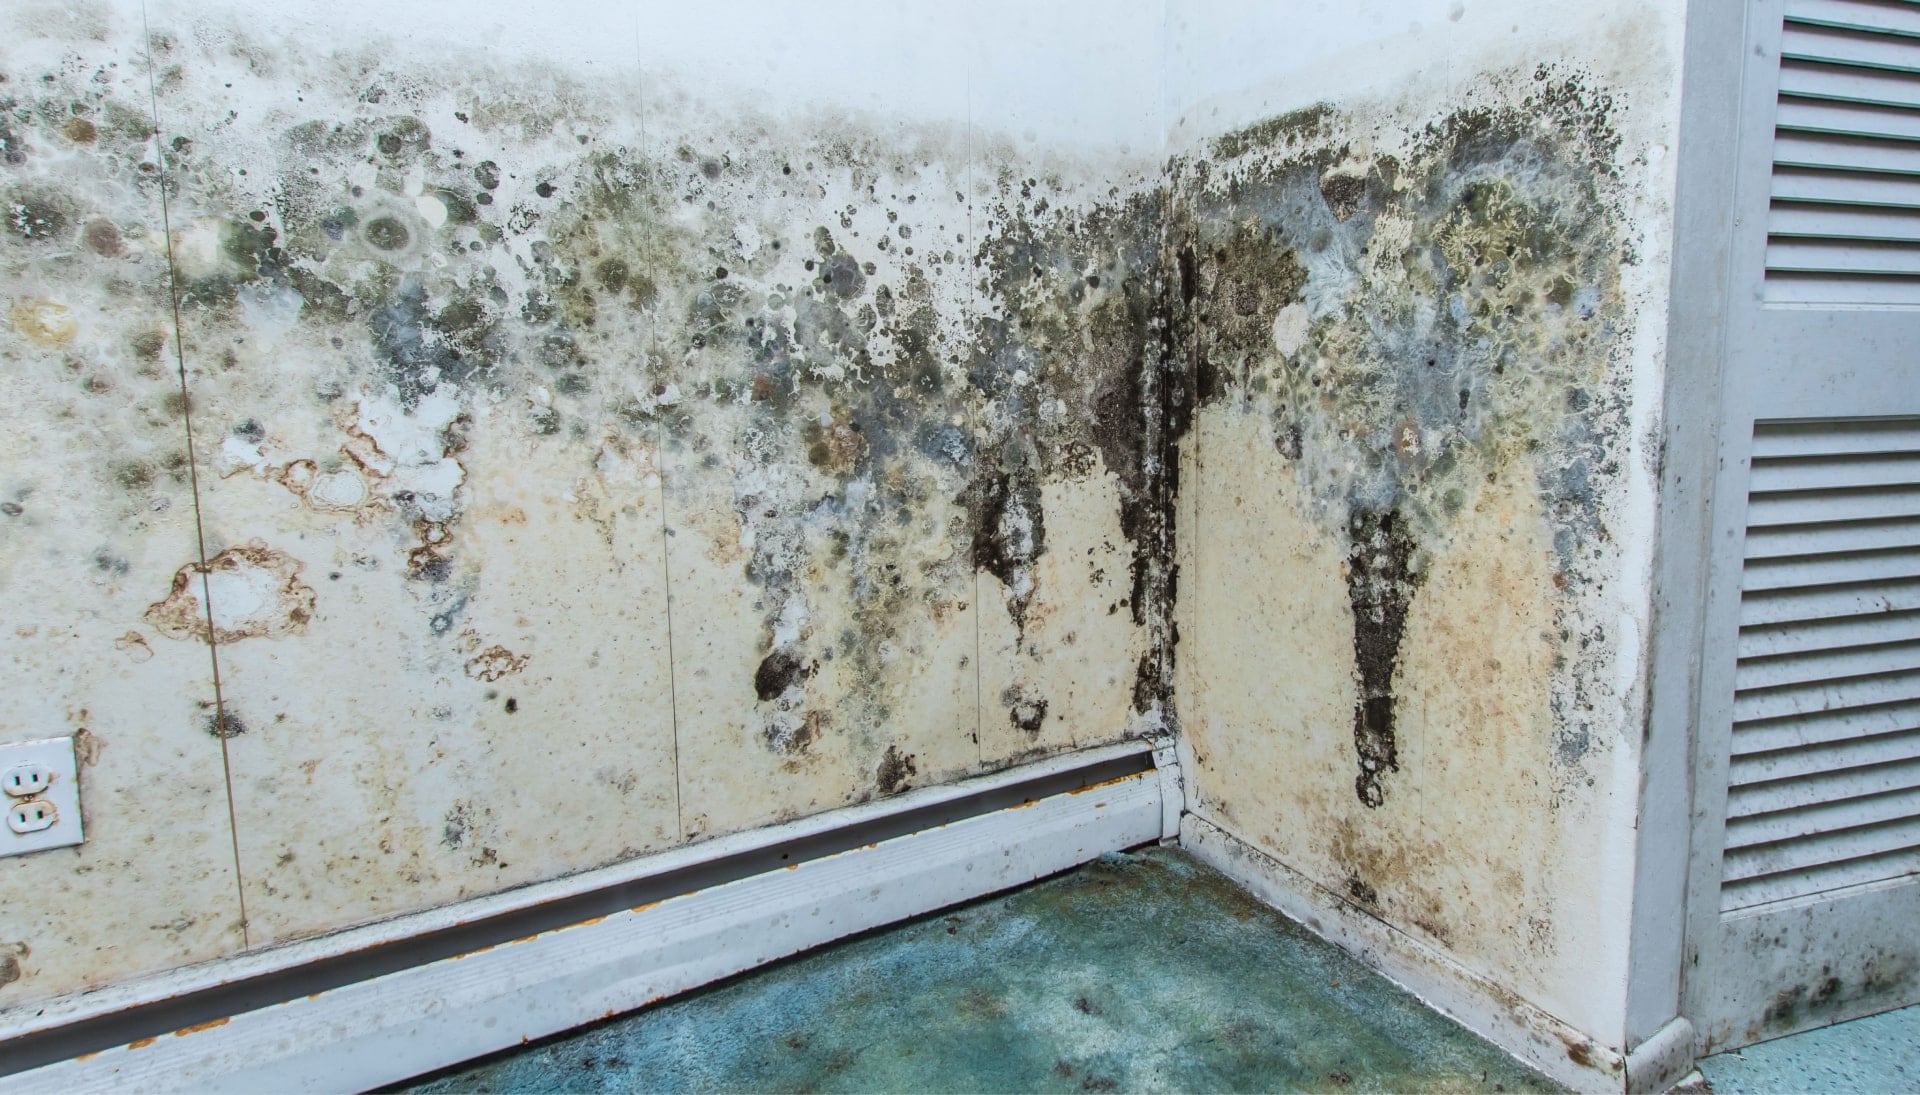 Professional mold removal, odor control, and water damage restoration service in Kirby, Indiana.